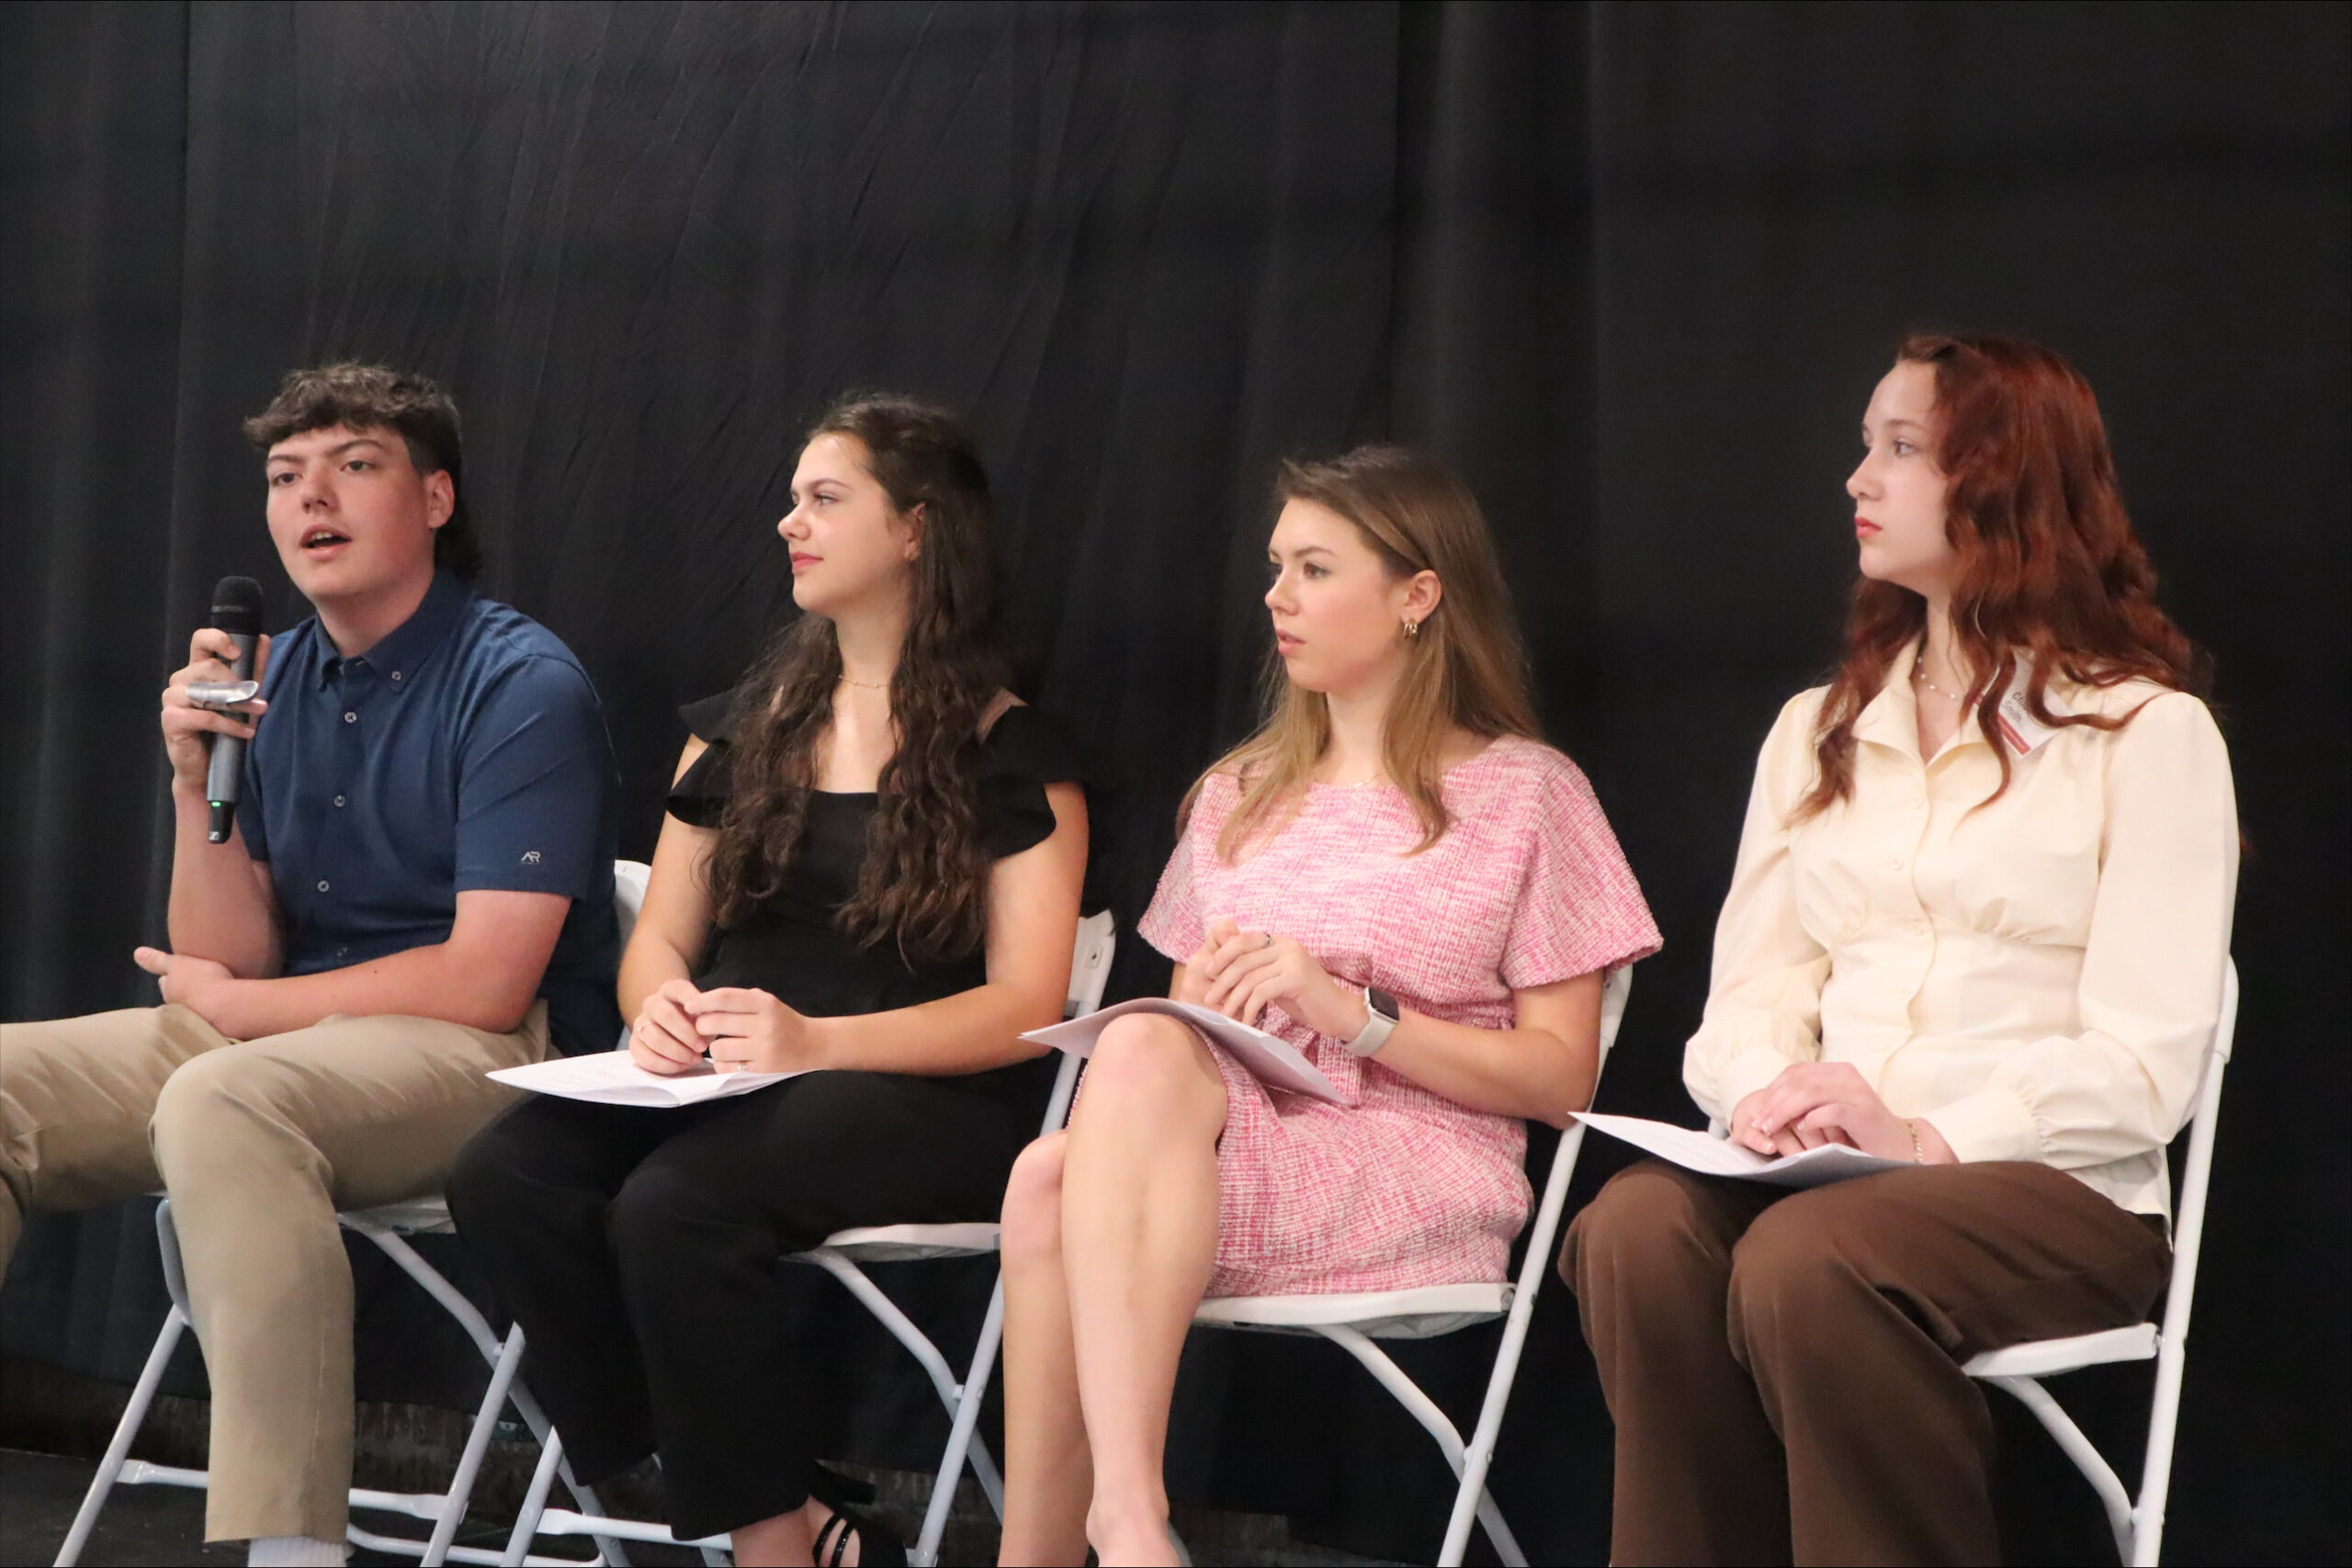 Four student panelists address the audience from on stage